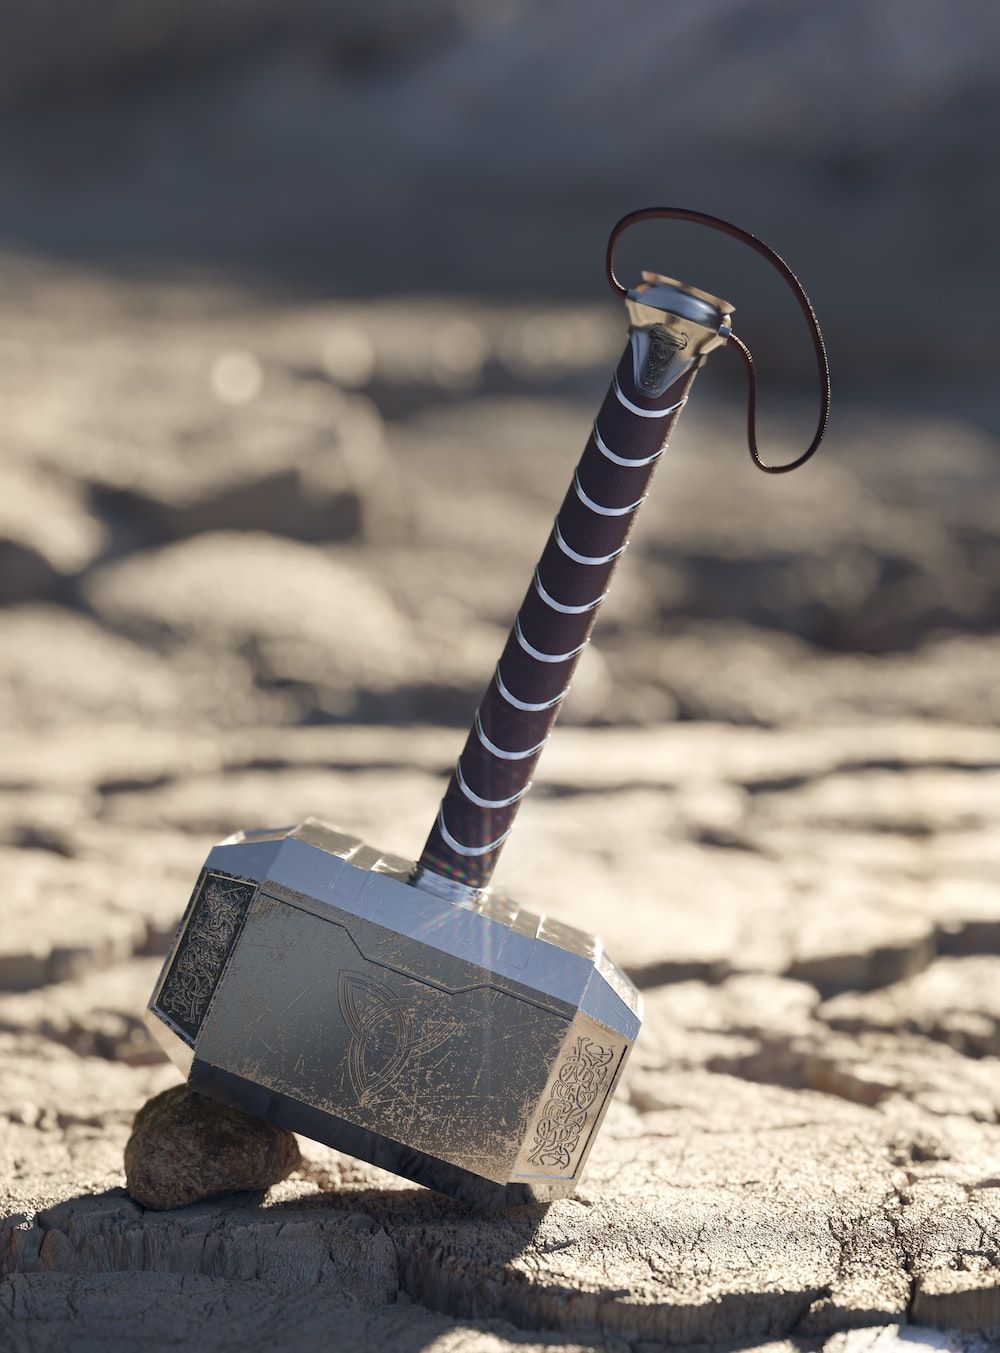 Thor's hammer on the ground - Thor